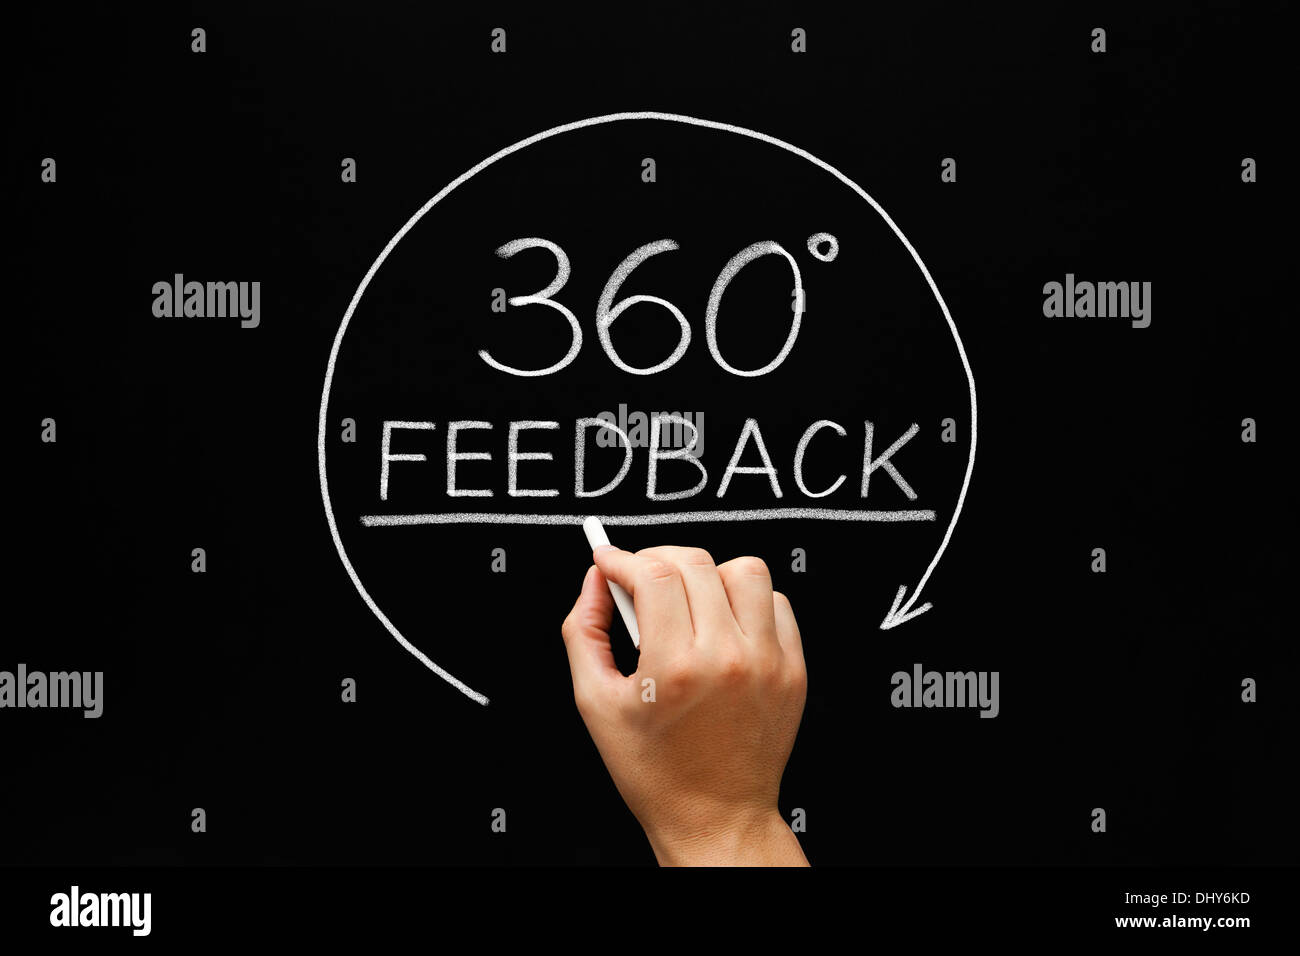 Hand sketching 360 degrees Feedback concept with white chalk on a blackboard. Stock Photo